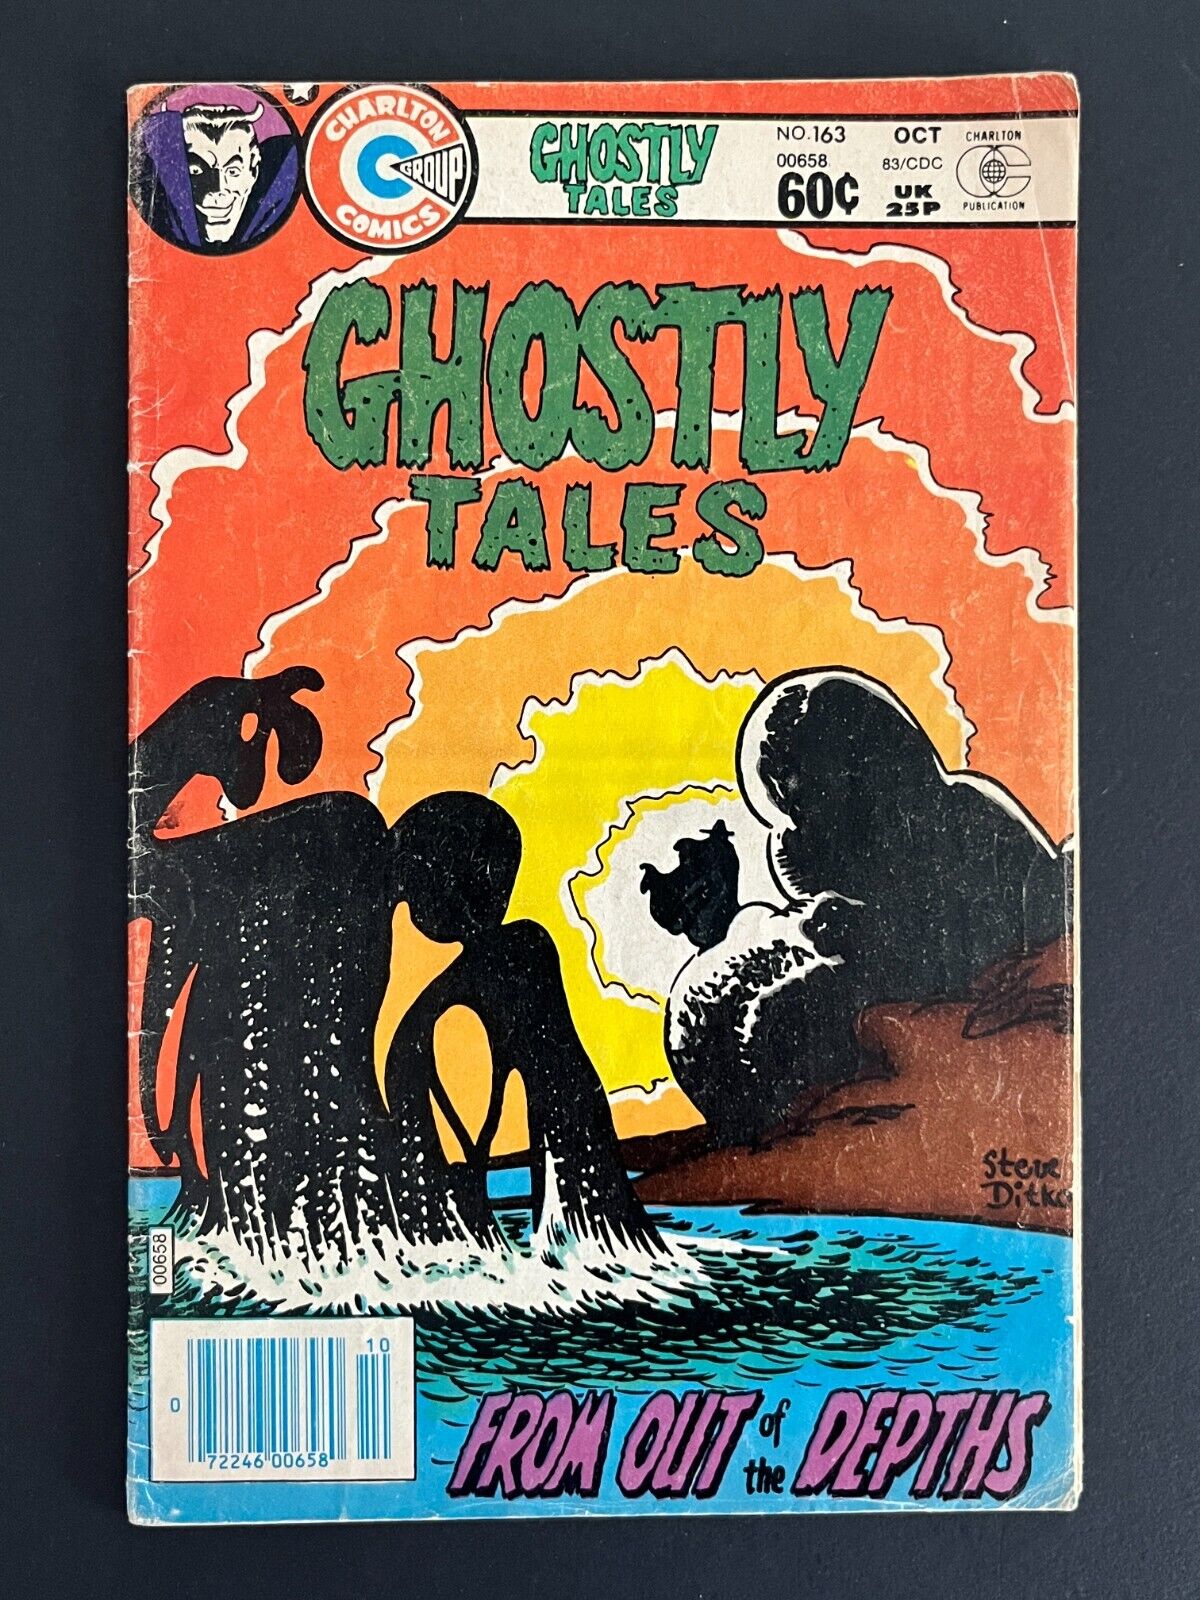 Ghostly Tales #163 (Charlton, 1984, STEVE DITKO COVER) COMBINE FOR 